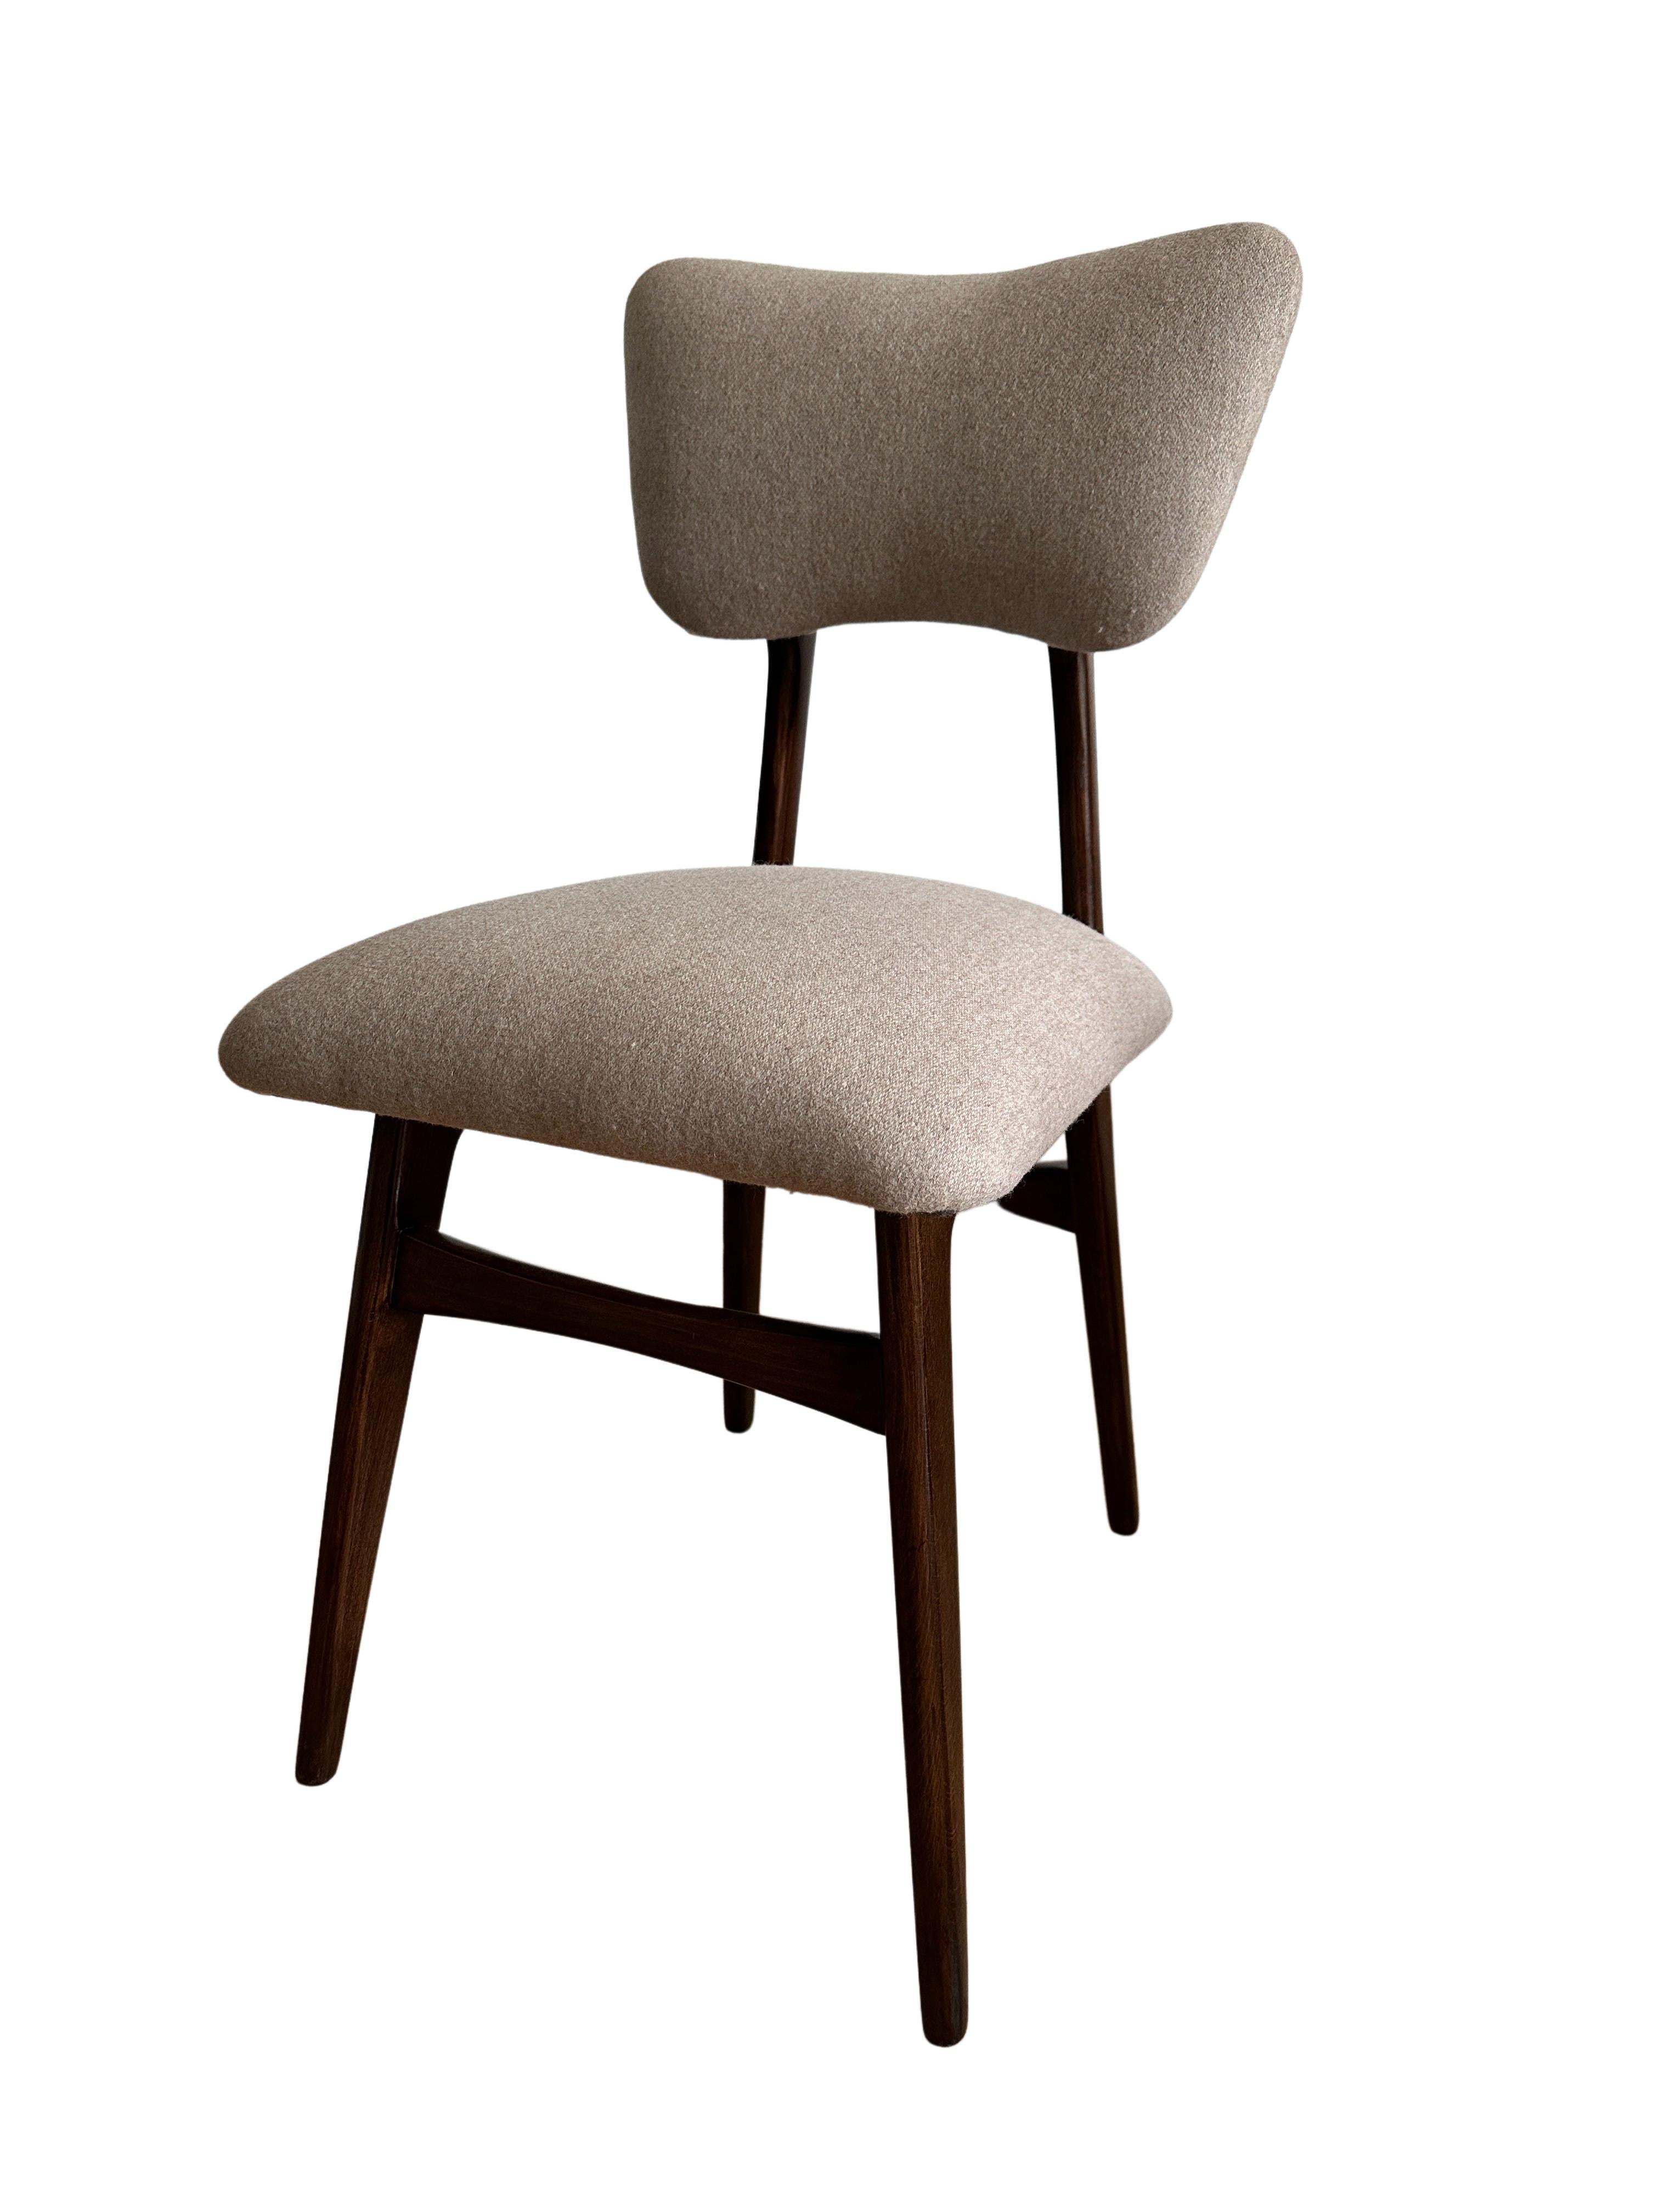 Bouclé Set of Two Midcentury Dining Chairs in Beige Wool Upholstery, Poland, 1960s For Sale